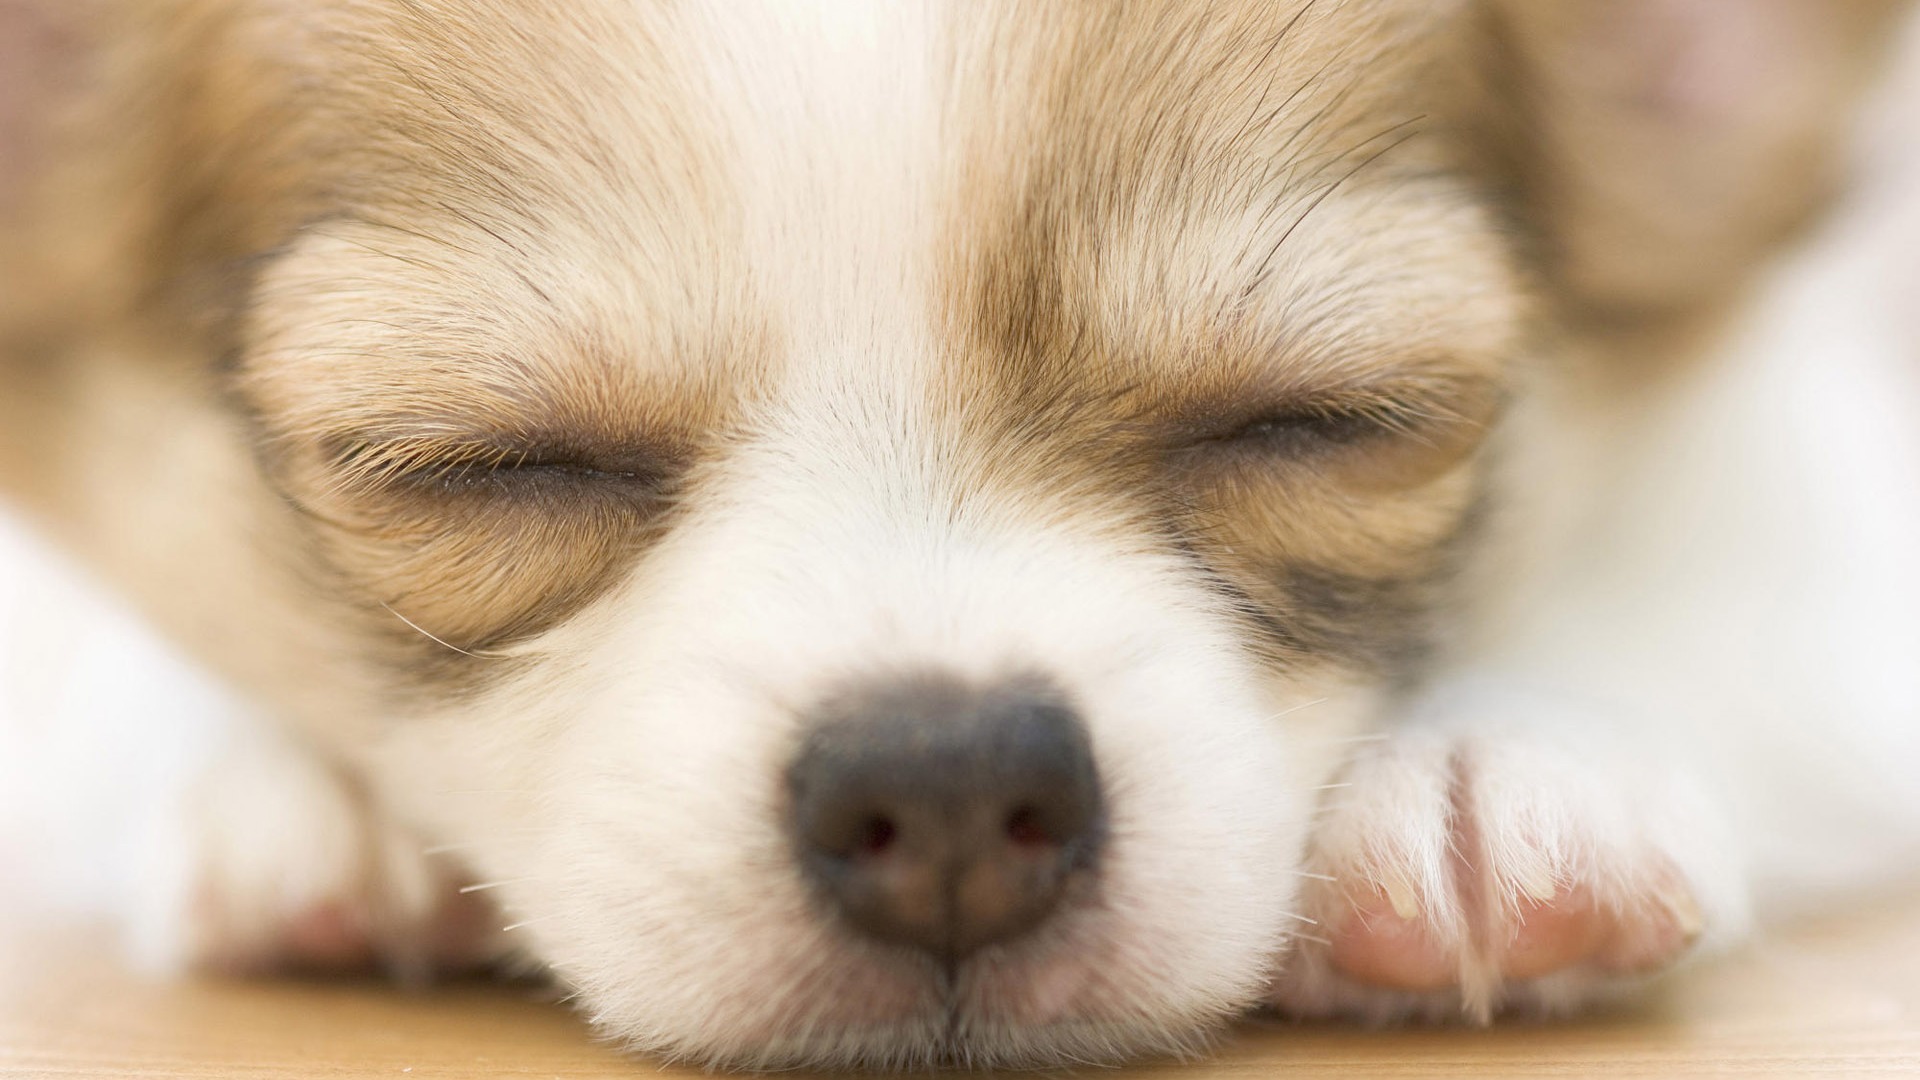 Puppy Photo HD wallpapers (9) #9 - 1920x1080